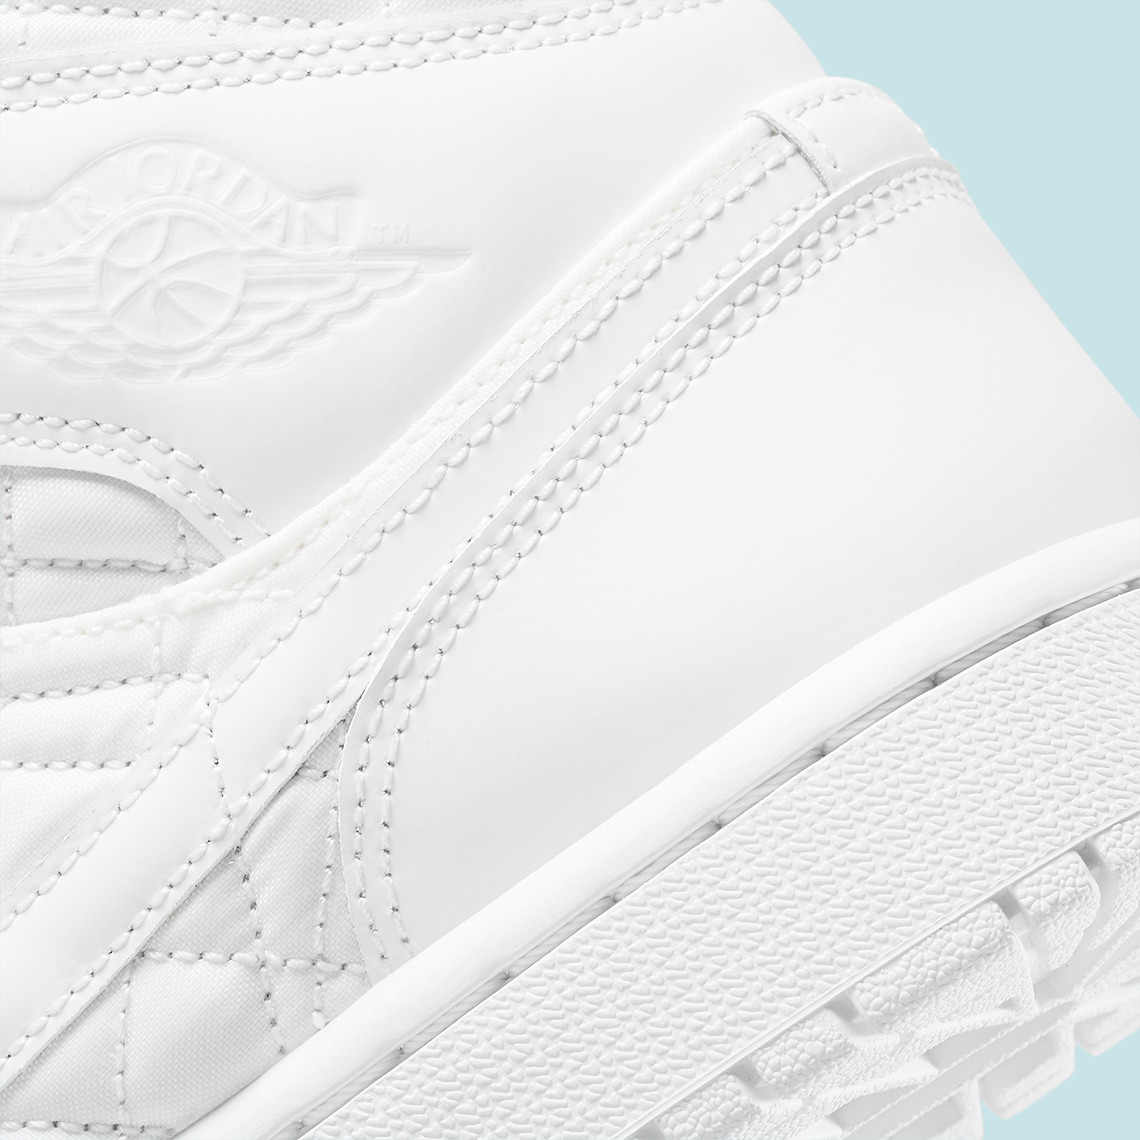 Air Jordan 1 Mid White Quilted DB6078-100 | SneakerNews.com